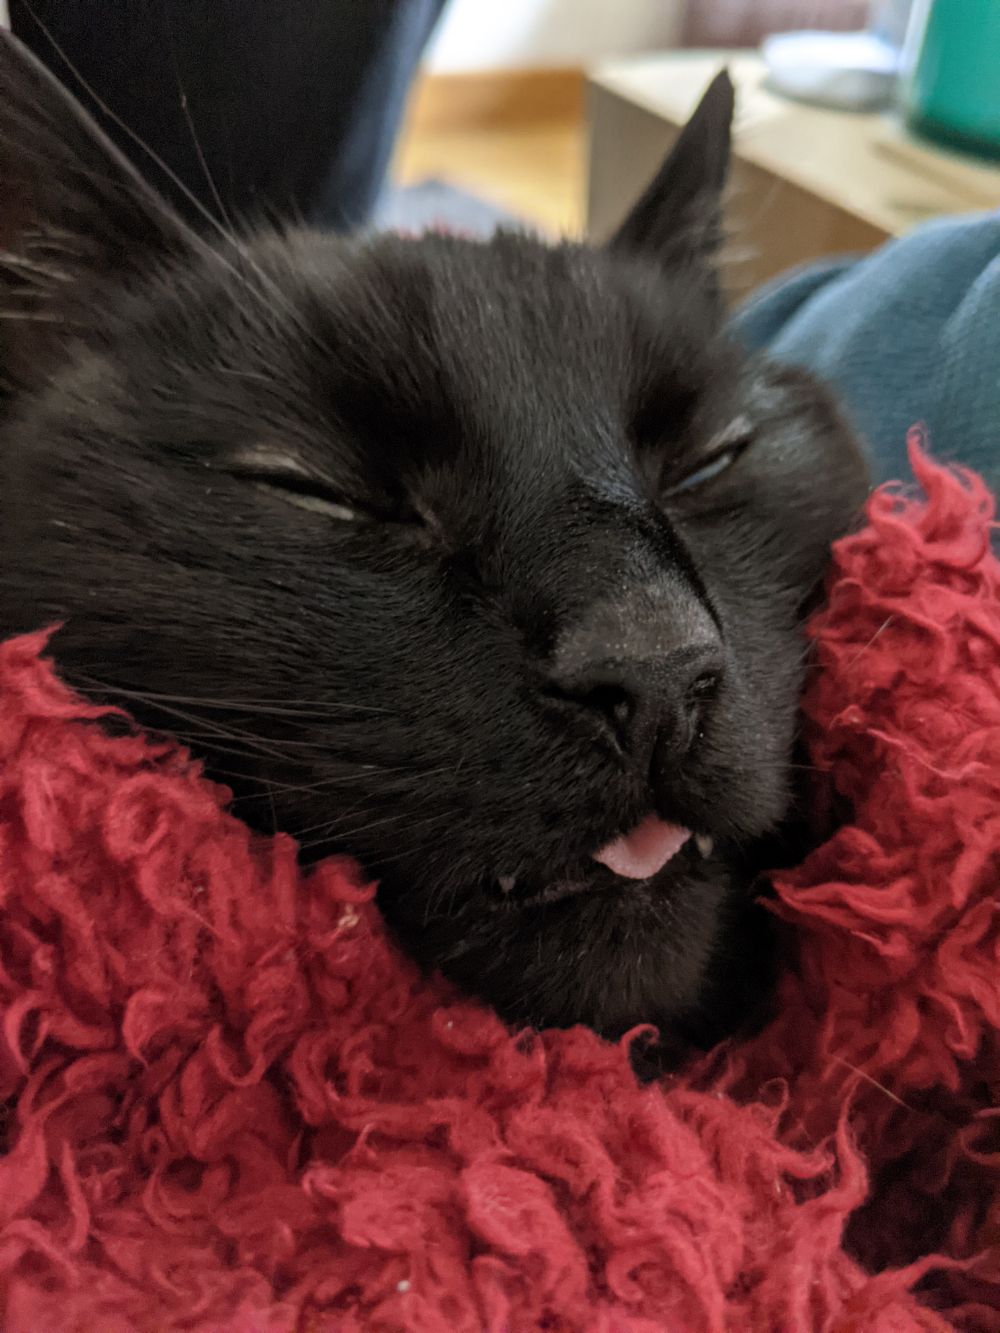 Profile of a black cat, wtih his eyes slightly open, and his tongue out in a good mlem, wrapped in a red blanket